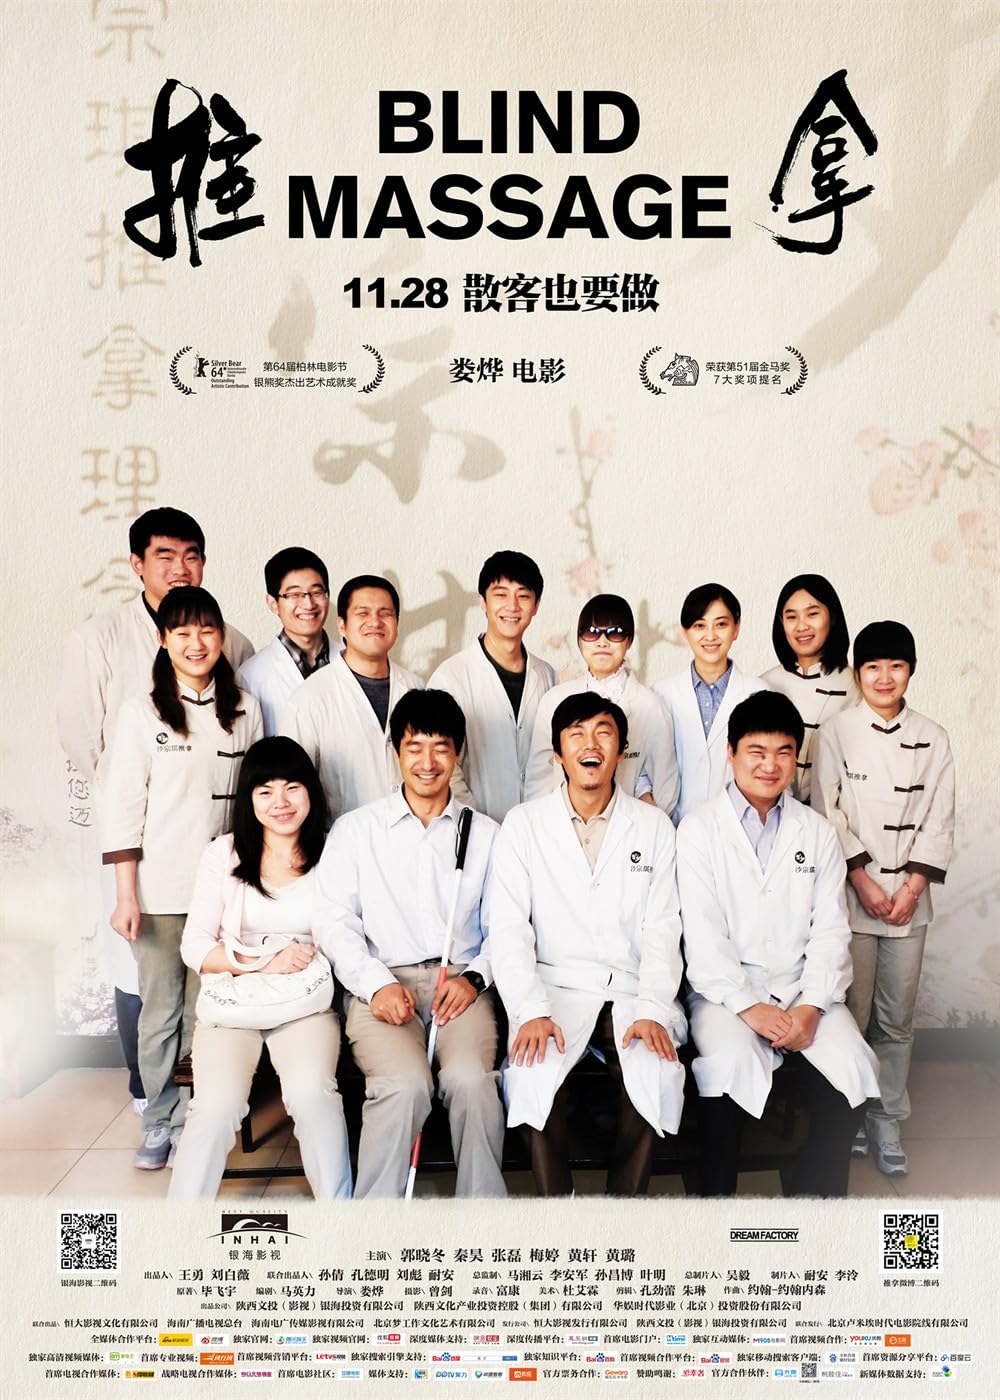 darcie wright recommends japanese massage full movie pic